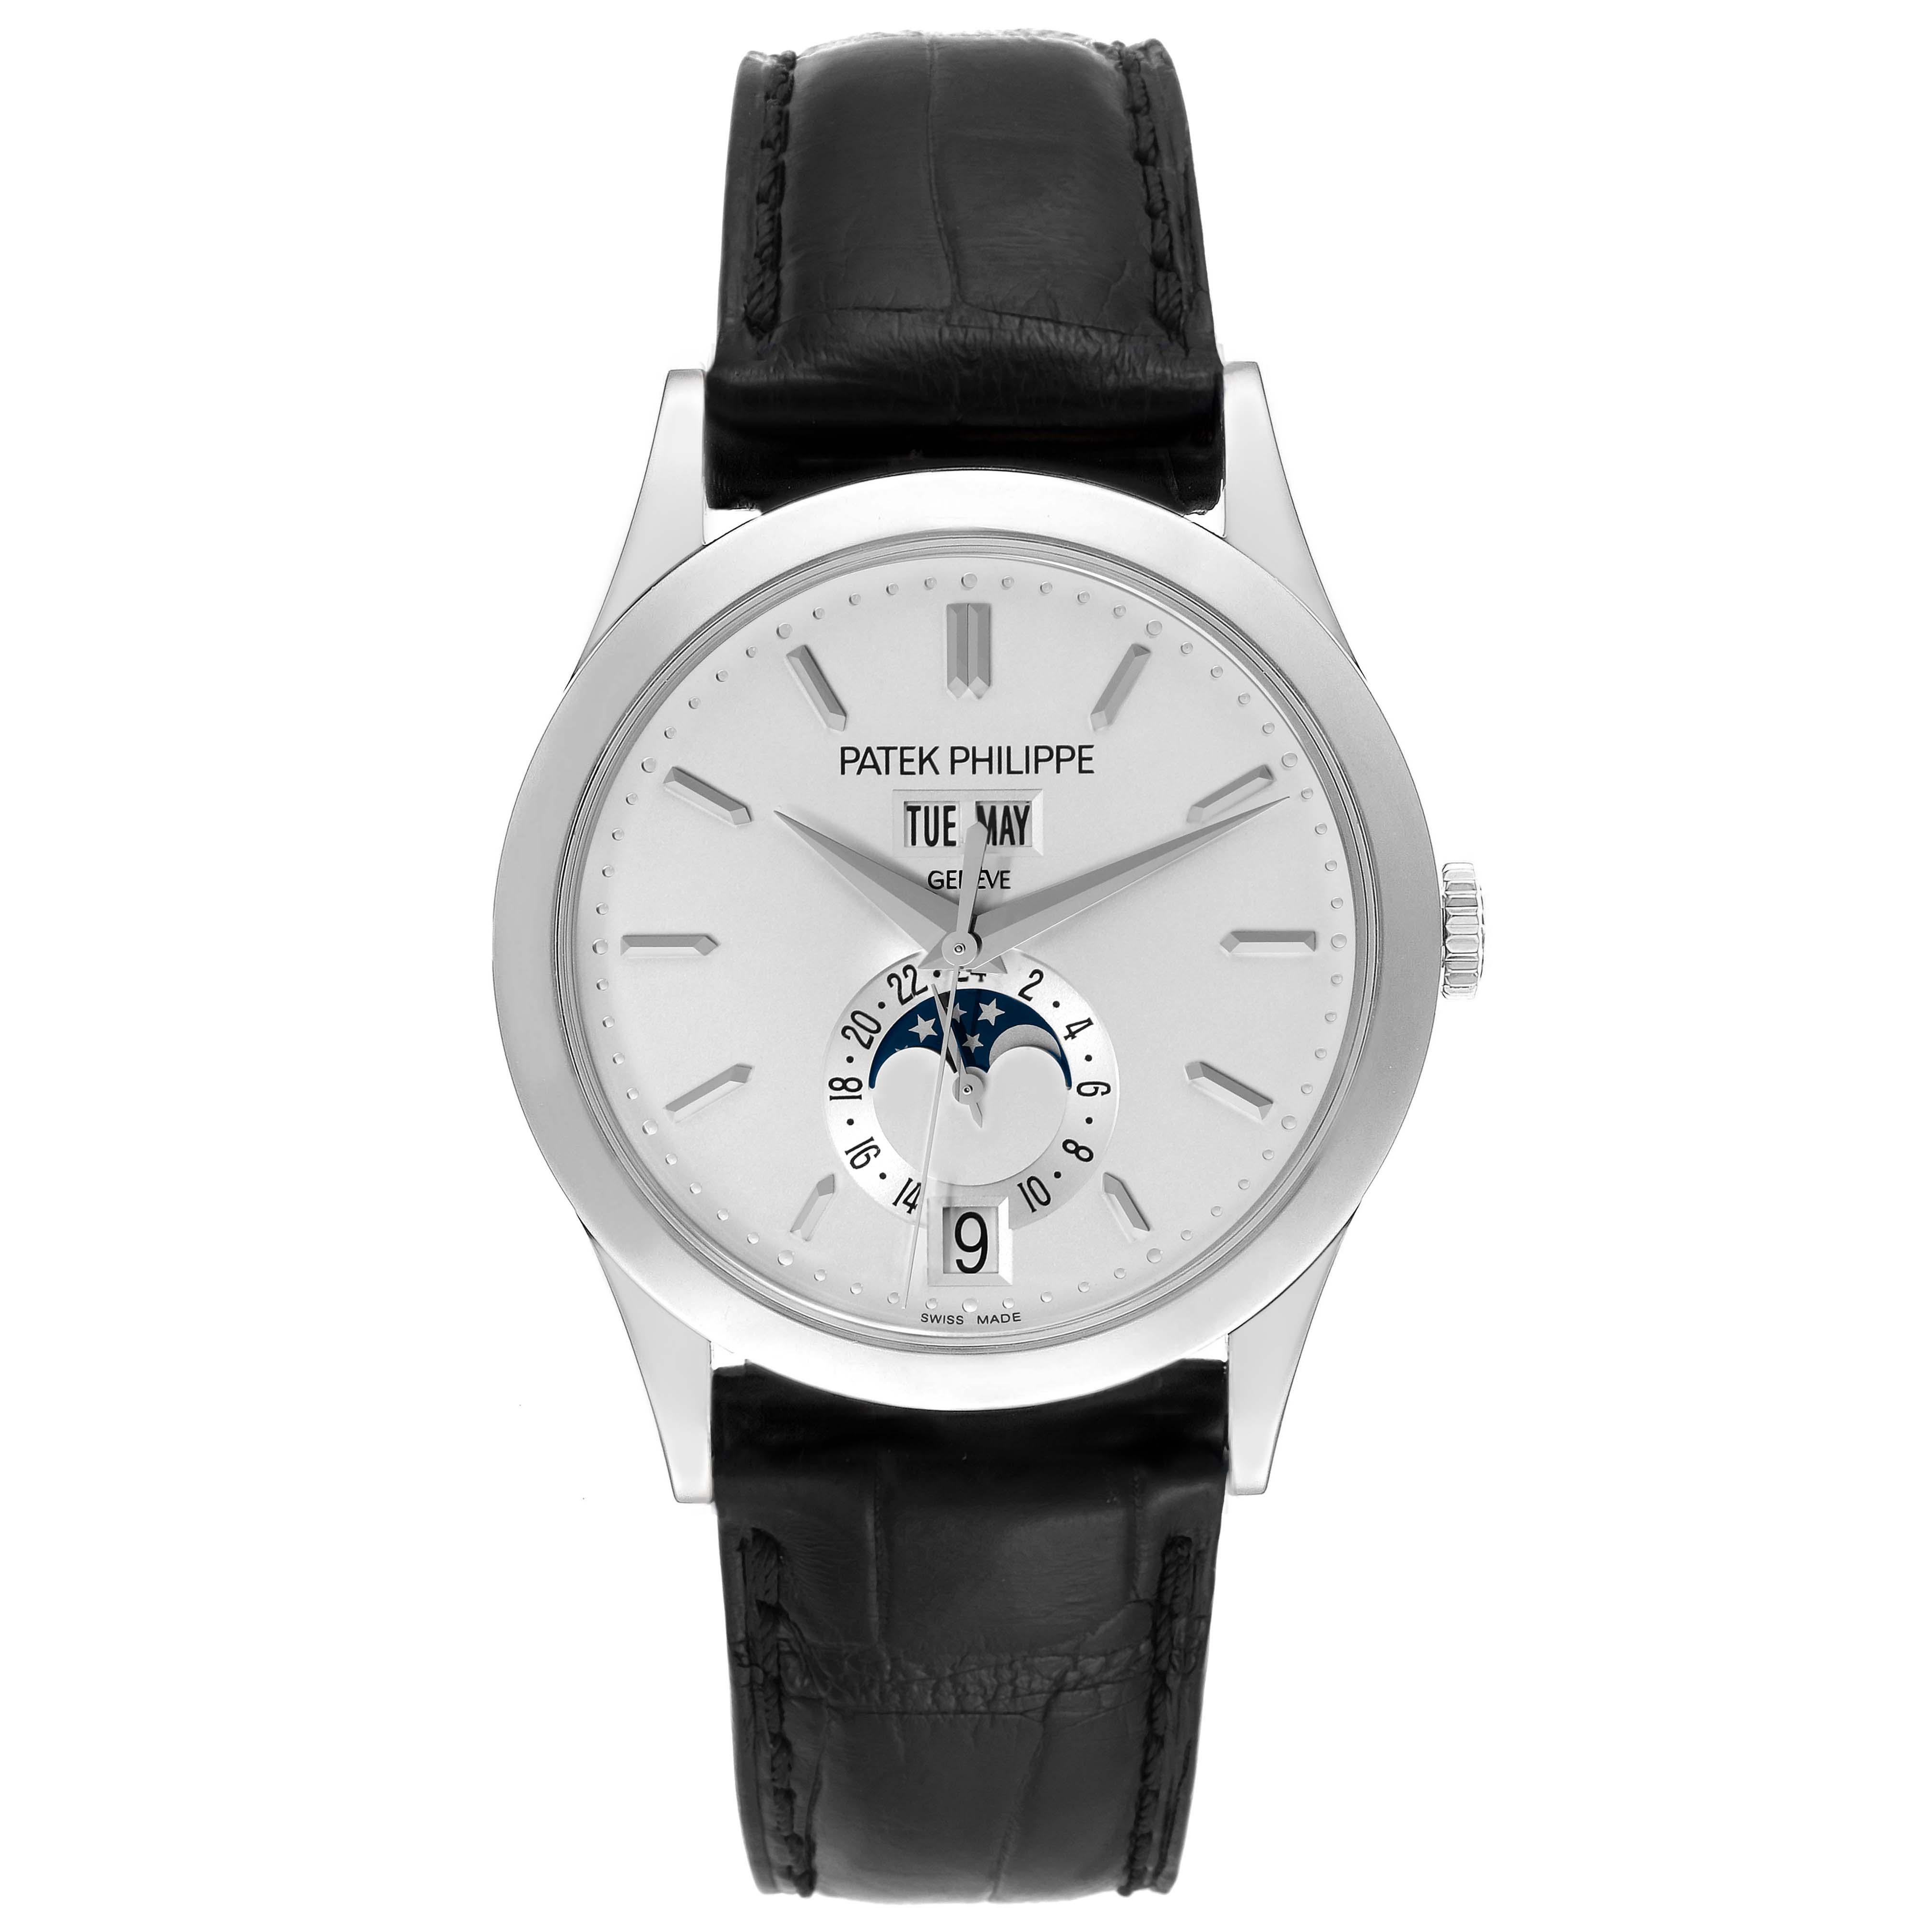 Patek Philippe Complications Annual Calendar White Gold Mens Watch 5396 For Sale 3